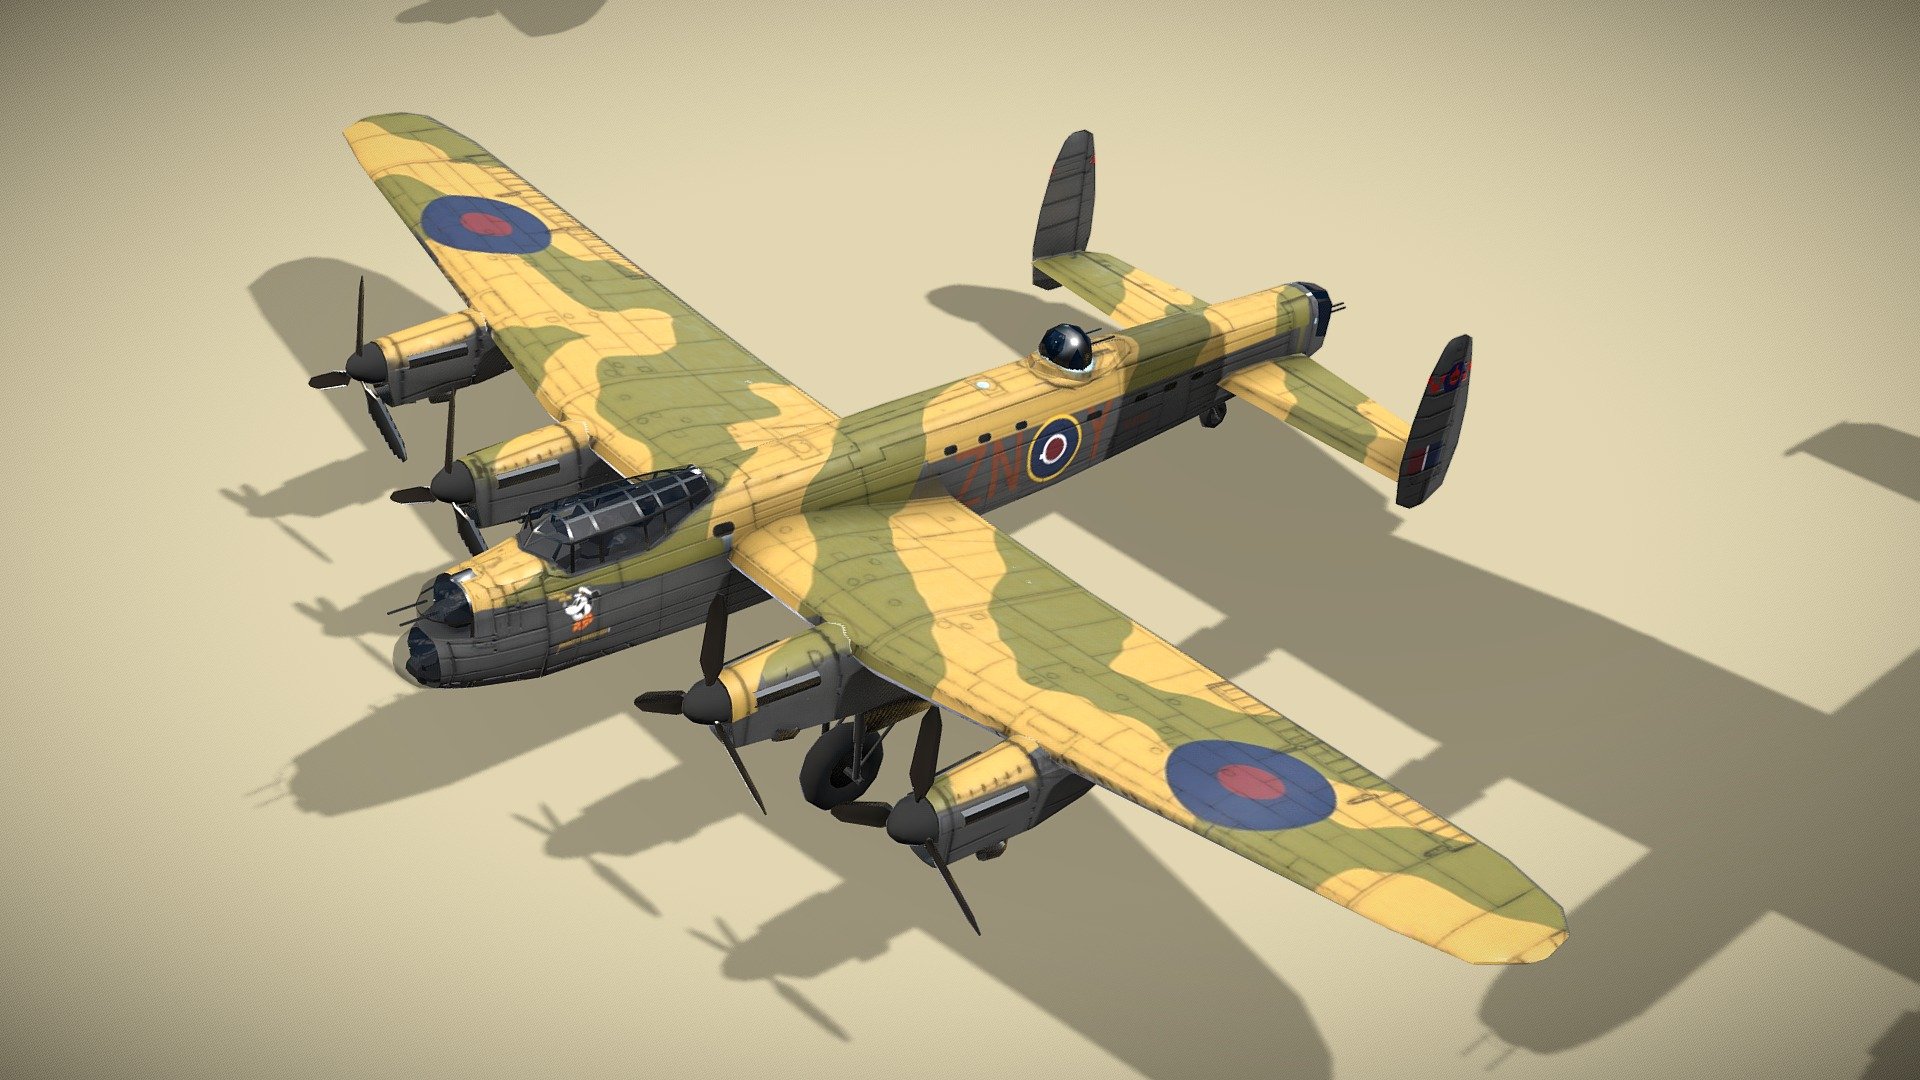 Avro Lancaster

Lowpoly model of british heavy bomber



Avro Lancaster is a British 2nd World War heavy bomber. It was designed and manufactured by Avro as a contemporary of the Handley Page Halifax, both bombers having been developed to the same specification, as well as the Short Stirling, all three aircraft being four-engined heavy bombers adopted by the Royal Air Force (RAF) during the same wartime era. It first saw service with RAF Bomber Command in 1942 and as the strategic bombing offensive over Europe gathered momentum, it was the main aircraft for the night-time bombing campaigns that followed. As increasing numbers of the type were produced, it became the principal heavy bomber used by the RAF  and squadrons from other Commonwealth countries.



1 standing version with wheels and 2 flying versions with trails, afterburner, pilot and armament.

Model has bump map, roughness map and 3 x diffuse textures.



Check also my other aircrafts and cars - Avro Lancaster - Buy Royalty Free 3D model by NETRUNNER_pl 3d model